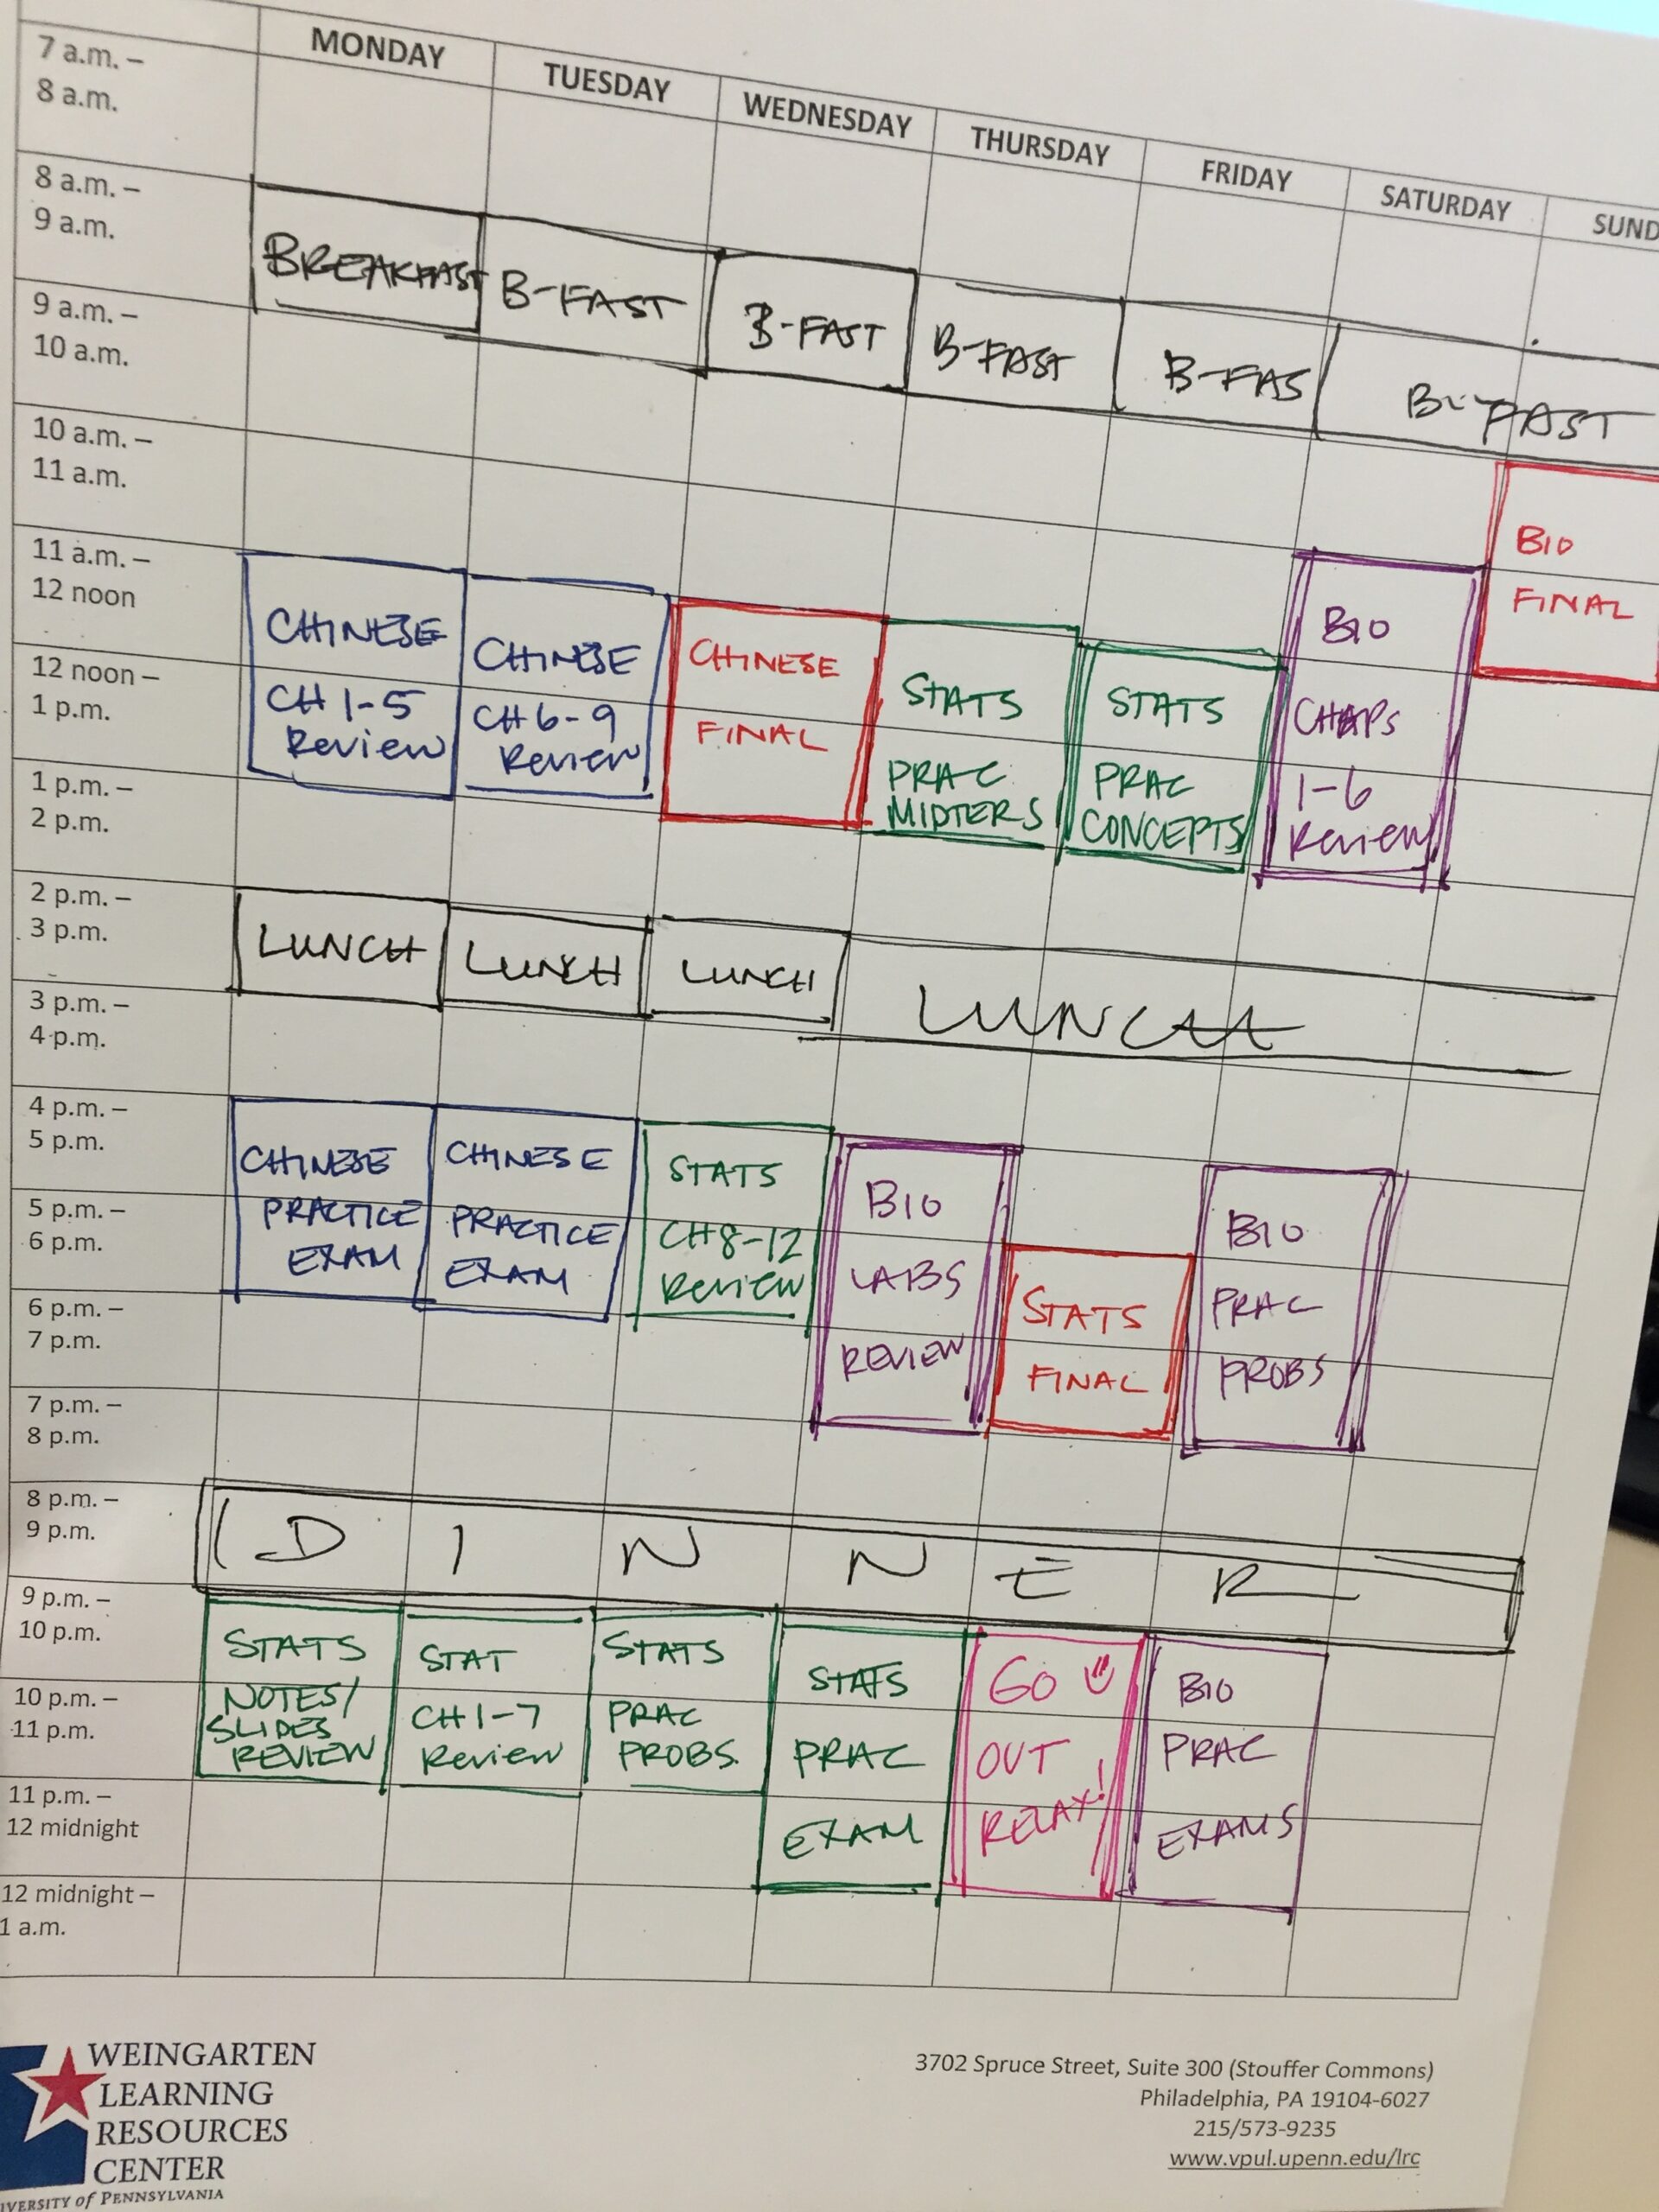 Example of a weekly calednar with study times planned out